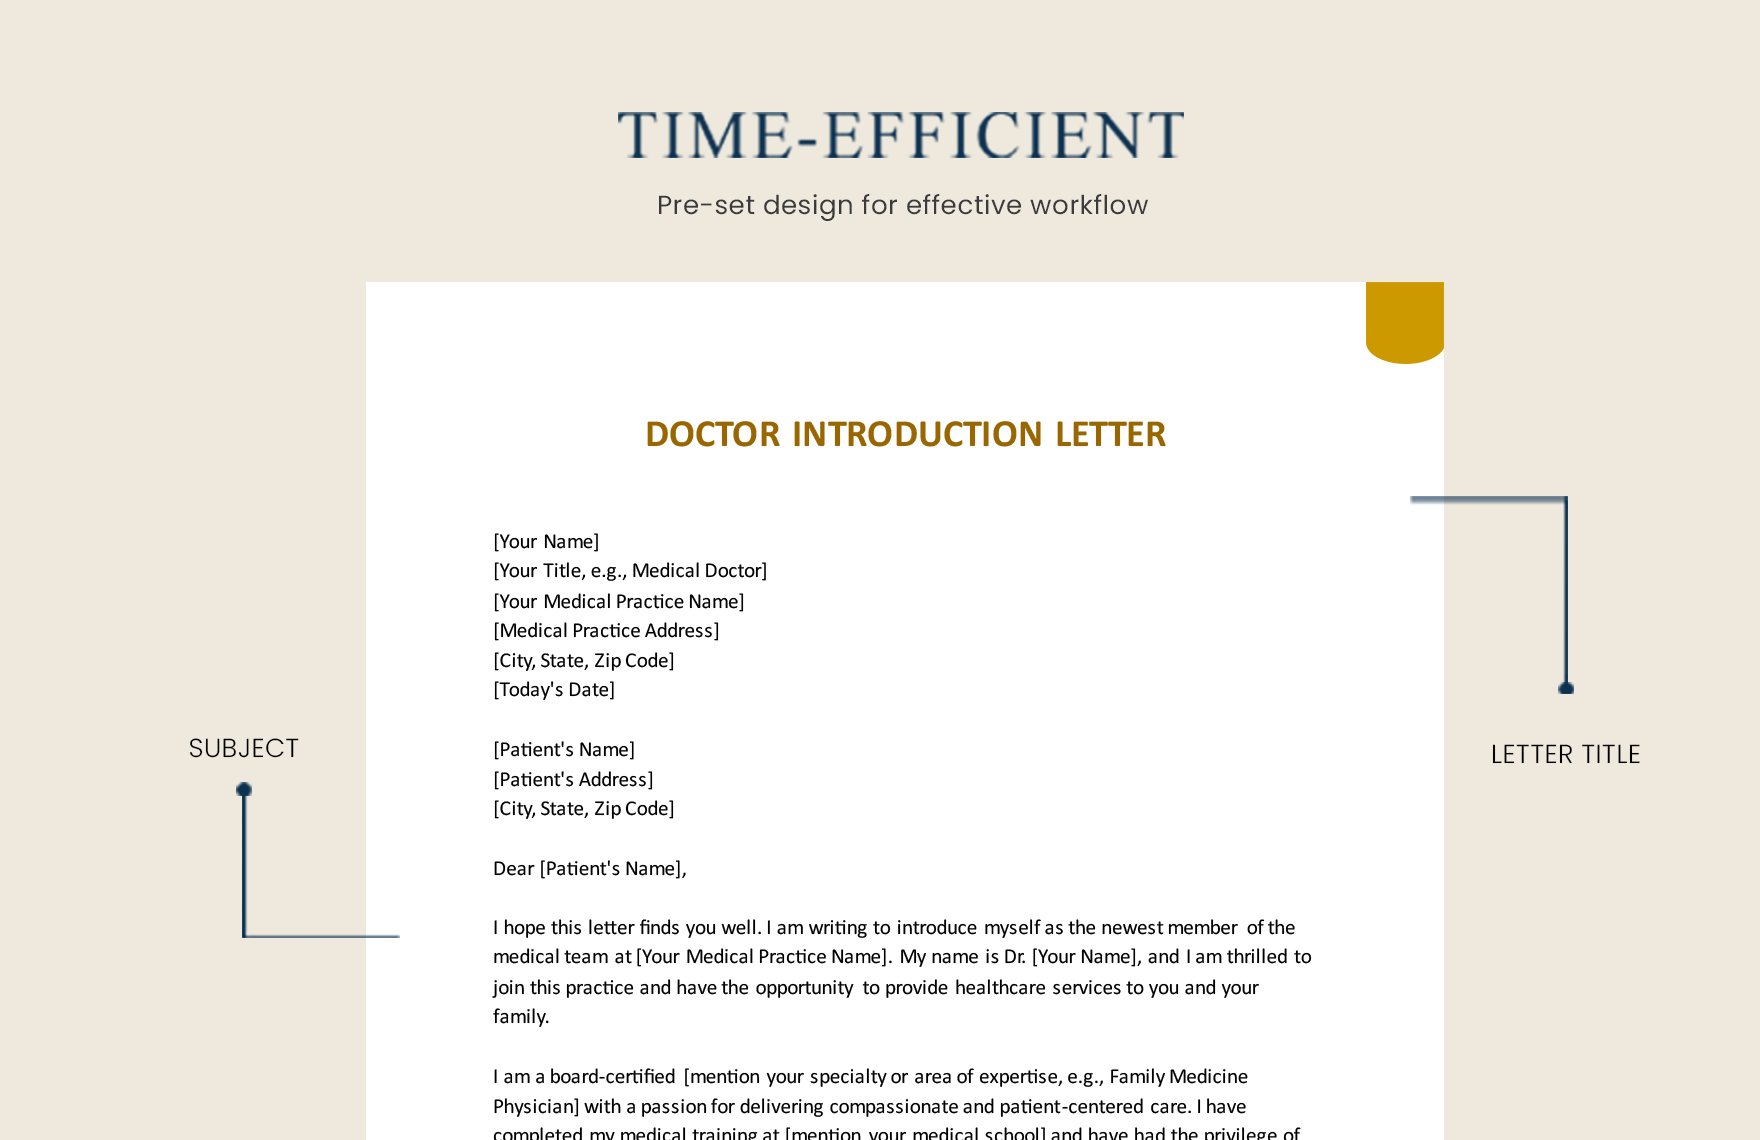 Doctor Introduction Letter